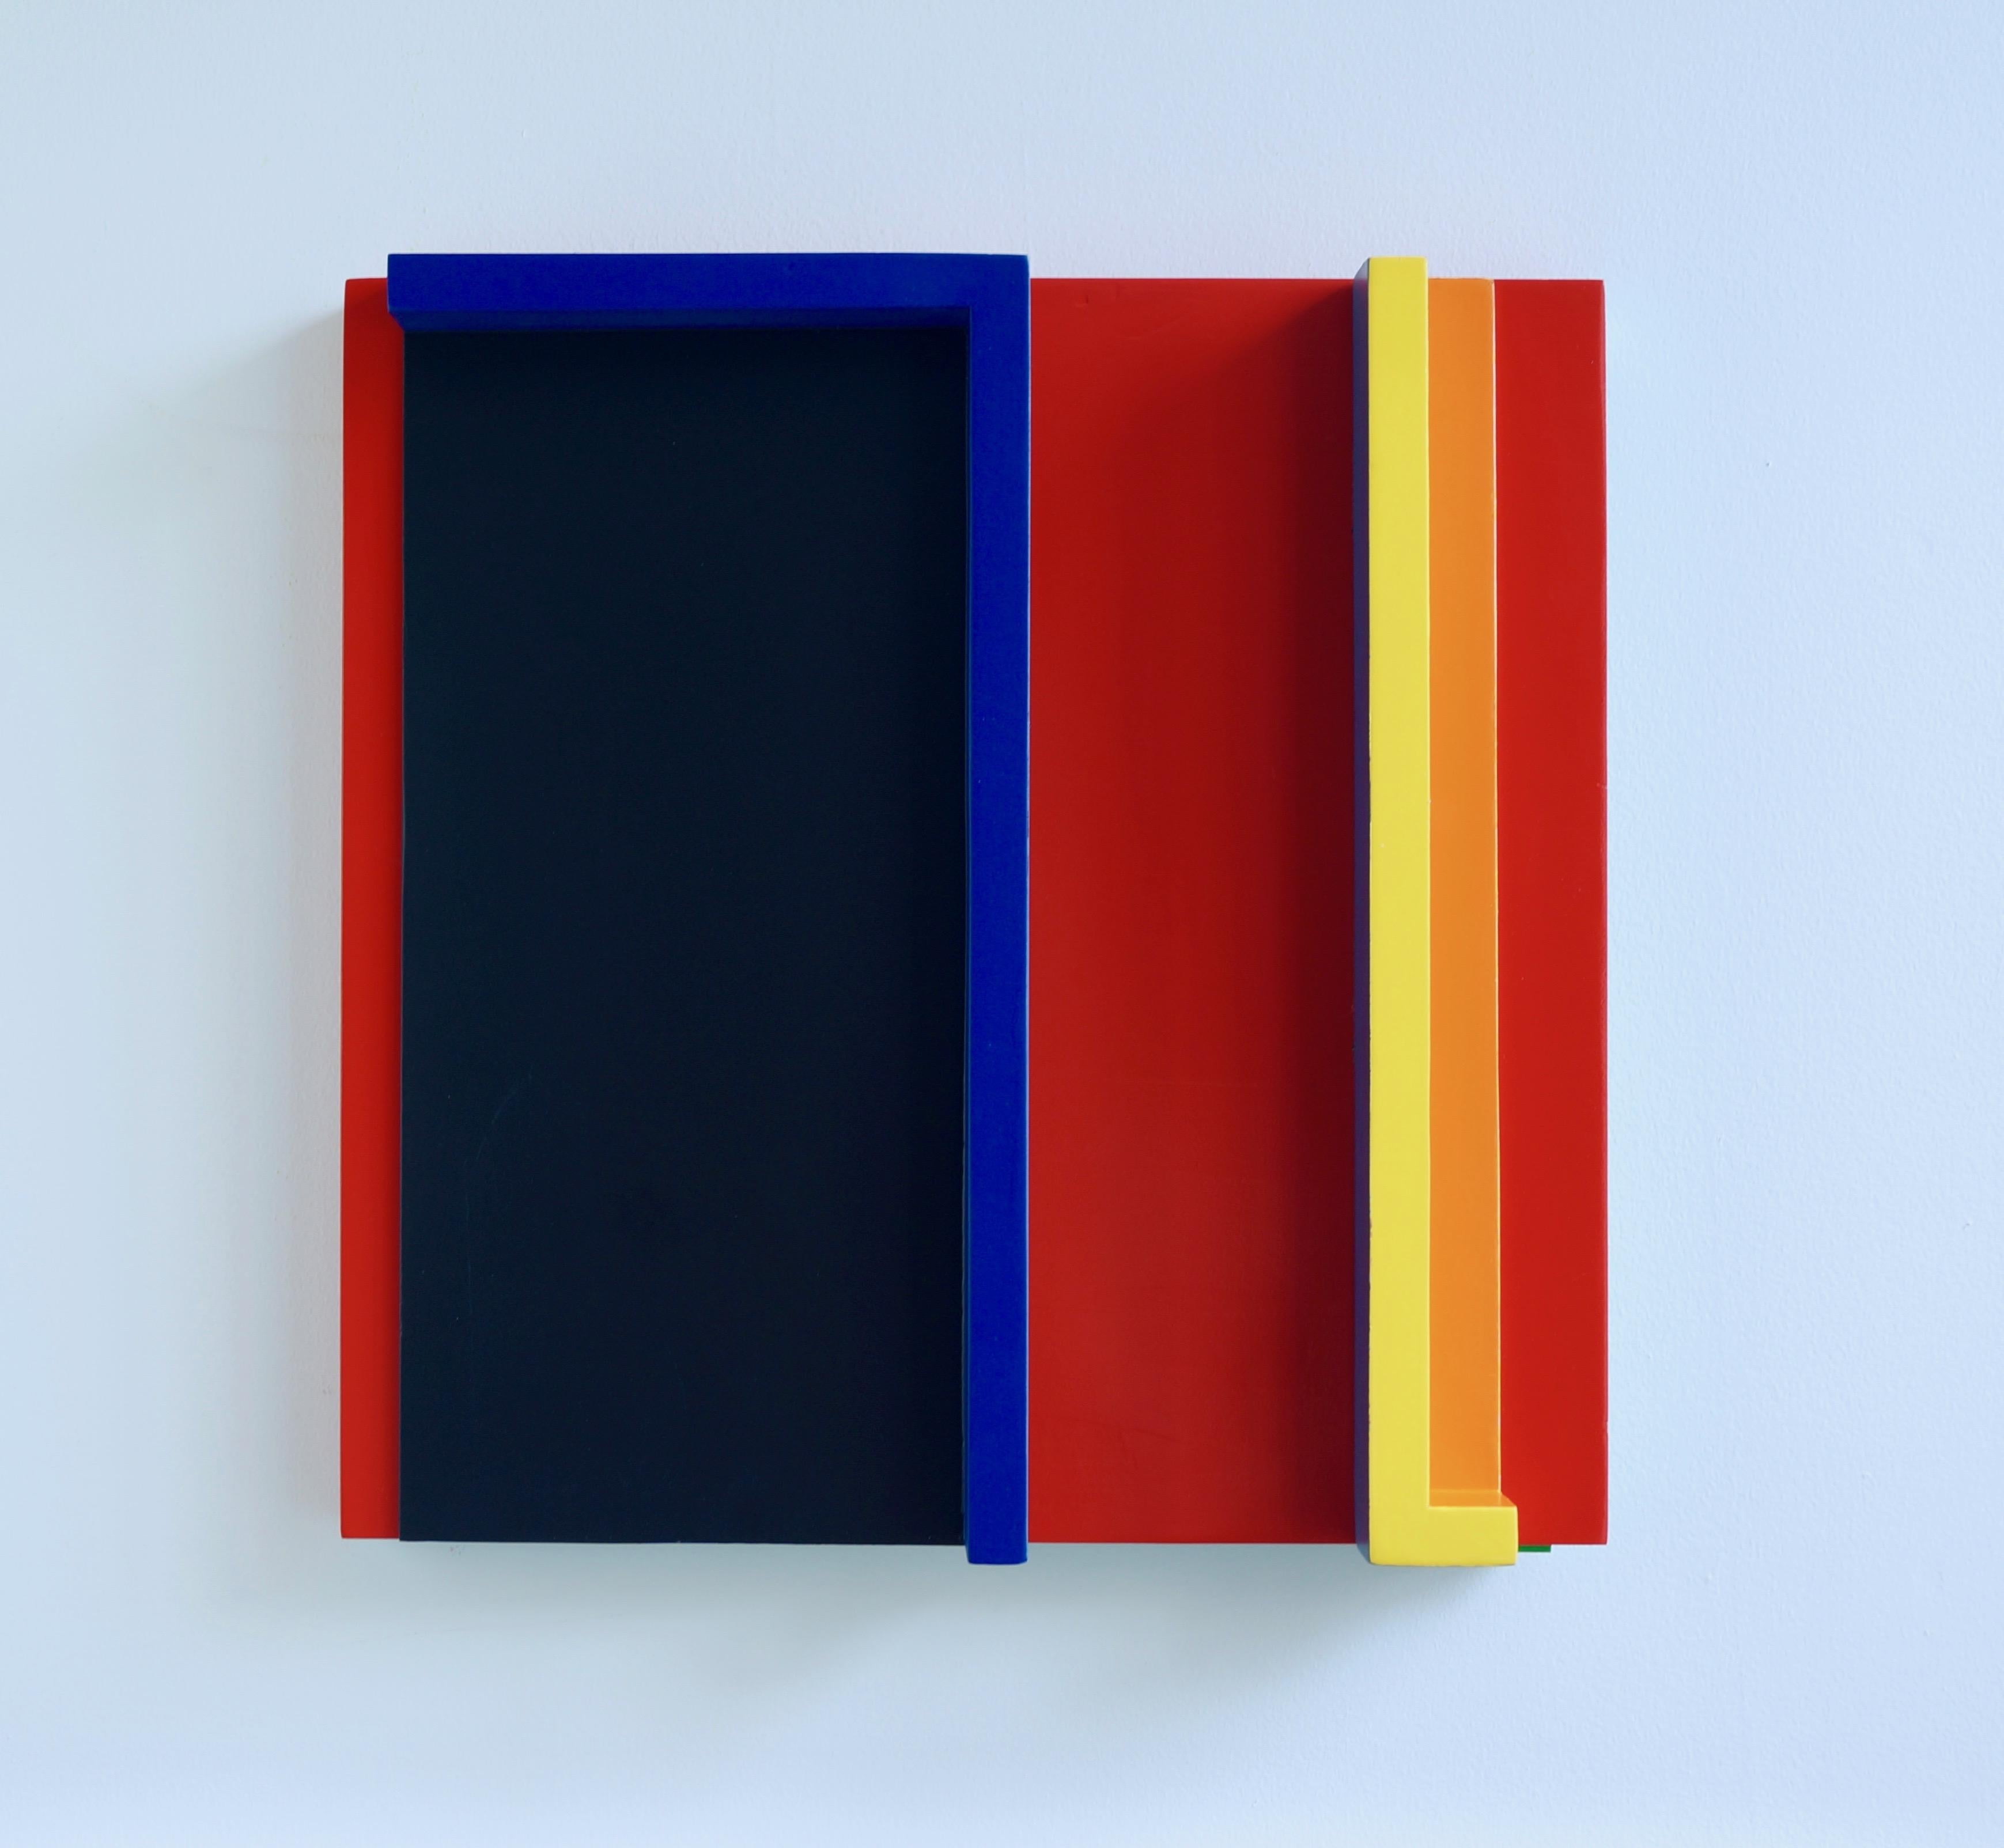 Rick Griggs Abstract Sculpture - "Outside at the Parker - Red", Wood Sculpture, Wall Mounting, Minimalism, Paint